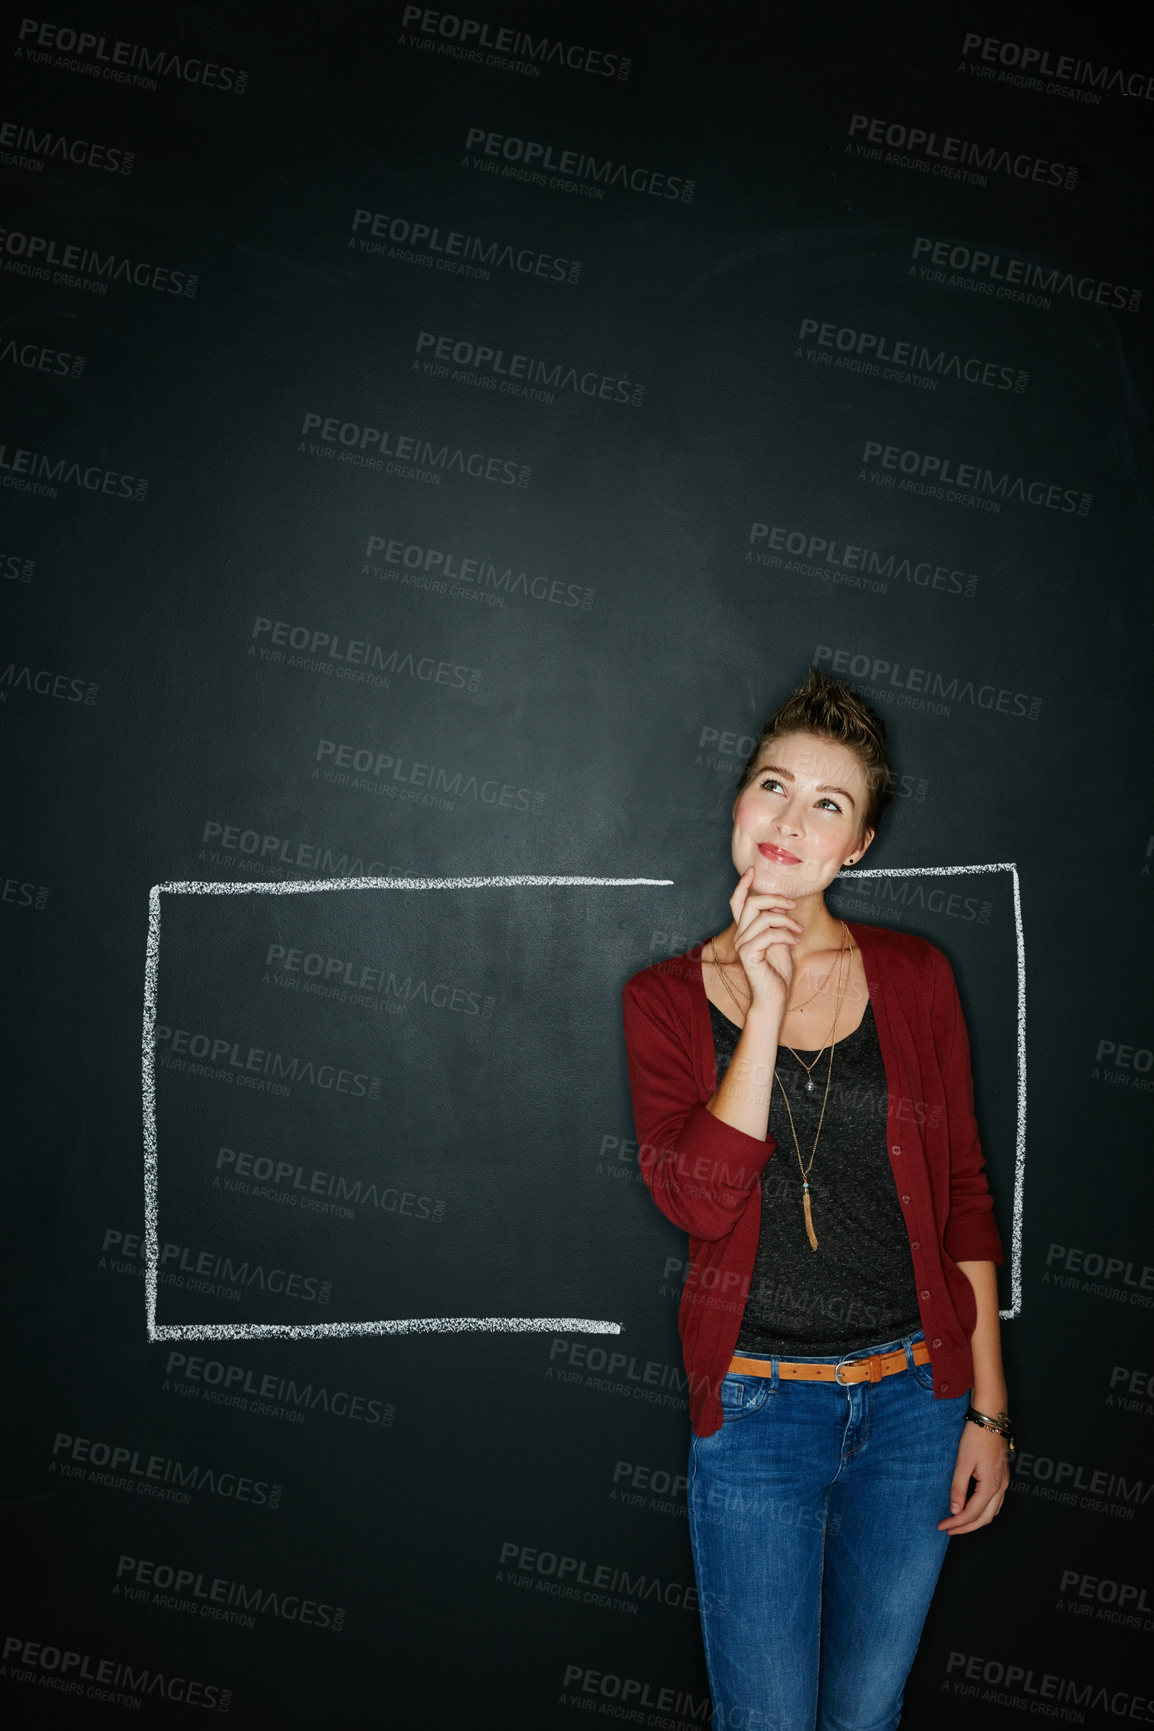 Buy stock photo Studio shot of a thoughtful young woman posing with a chalk illustration of a box against a dark background